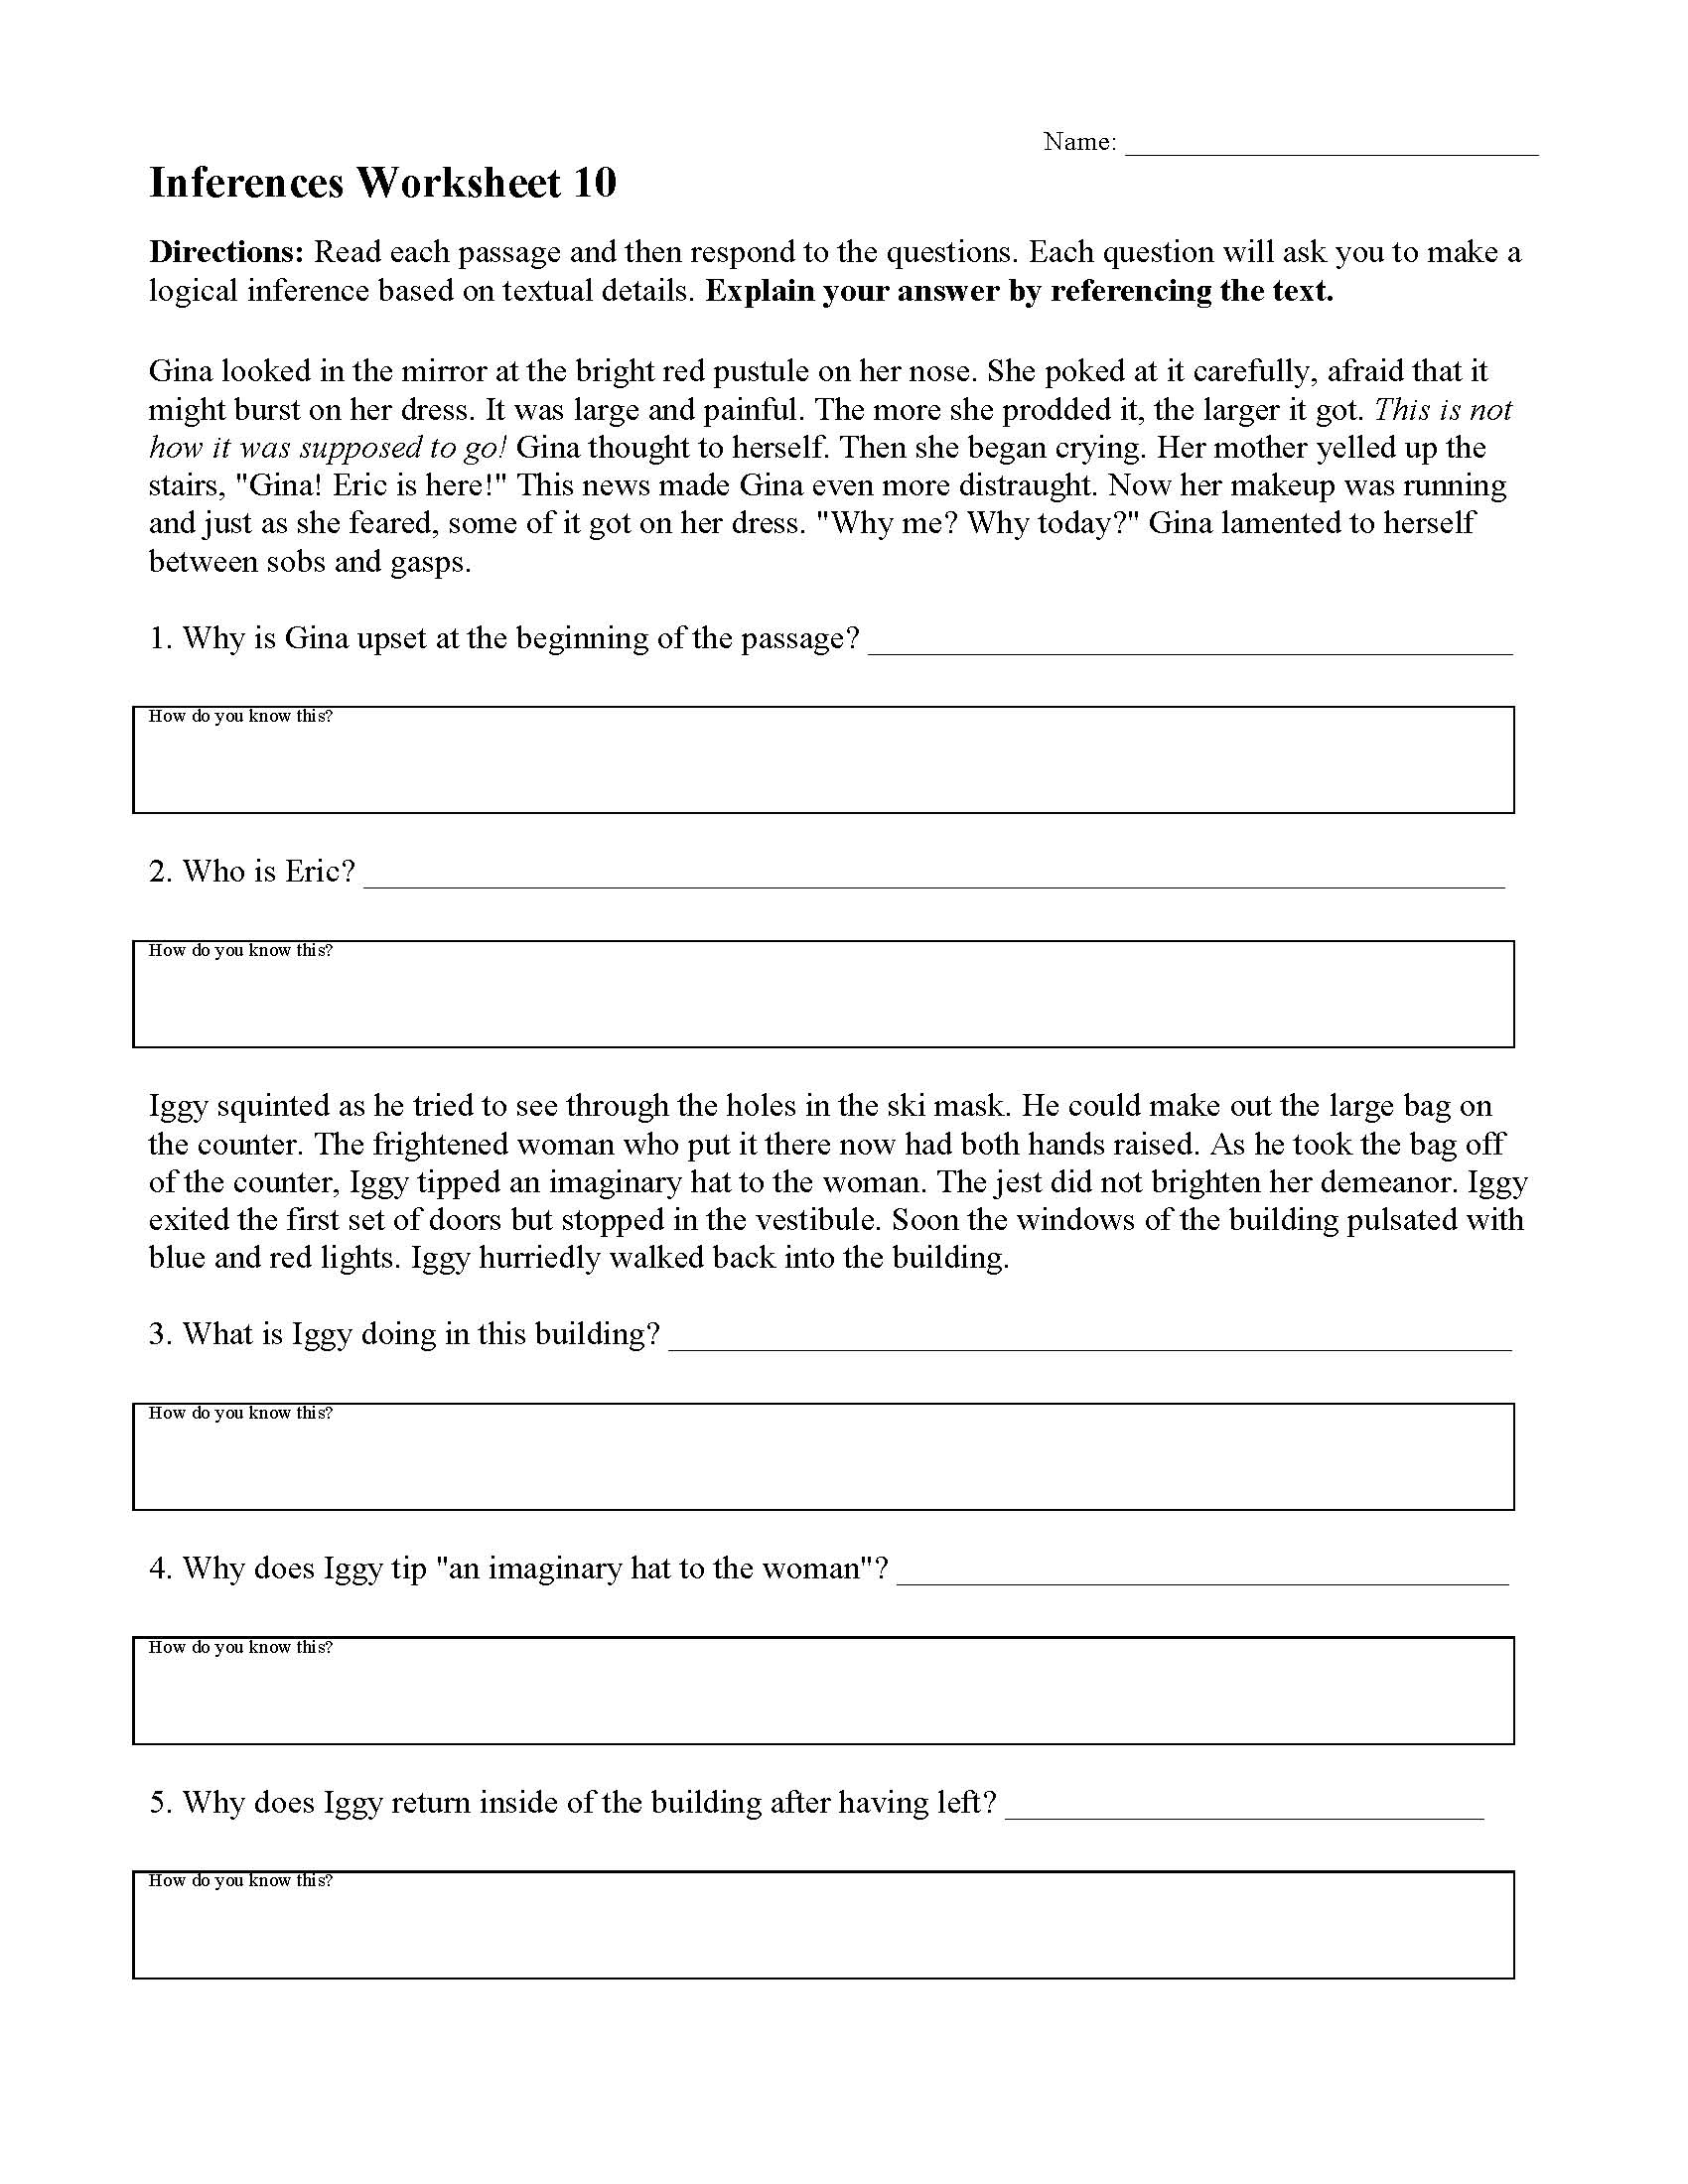 Inferences Worksheets  Ereading Worksheets In Citing Textual Evidence Worksheet